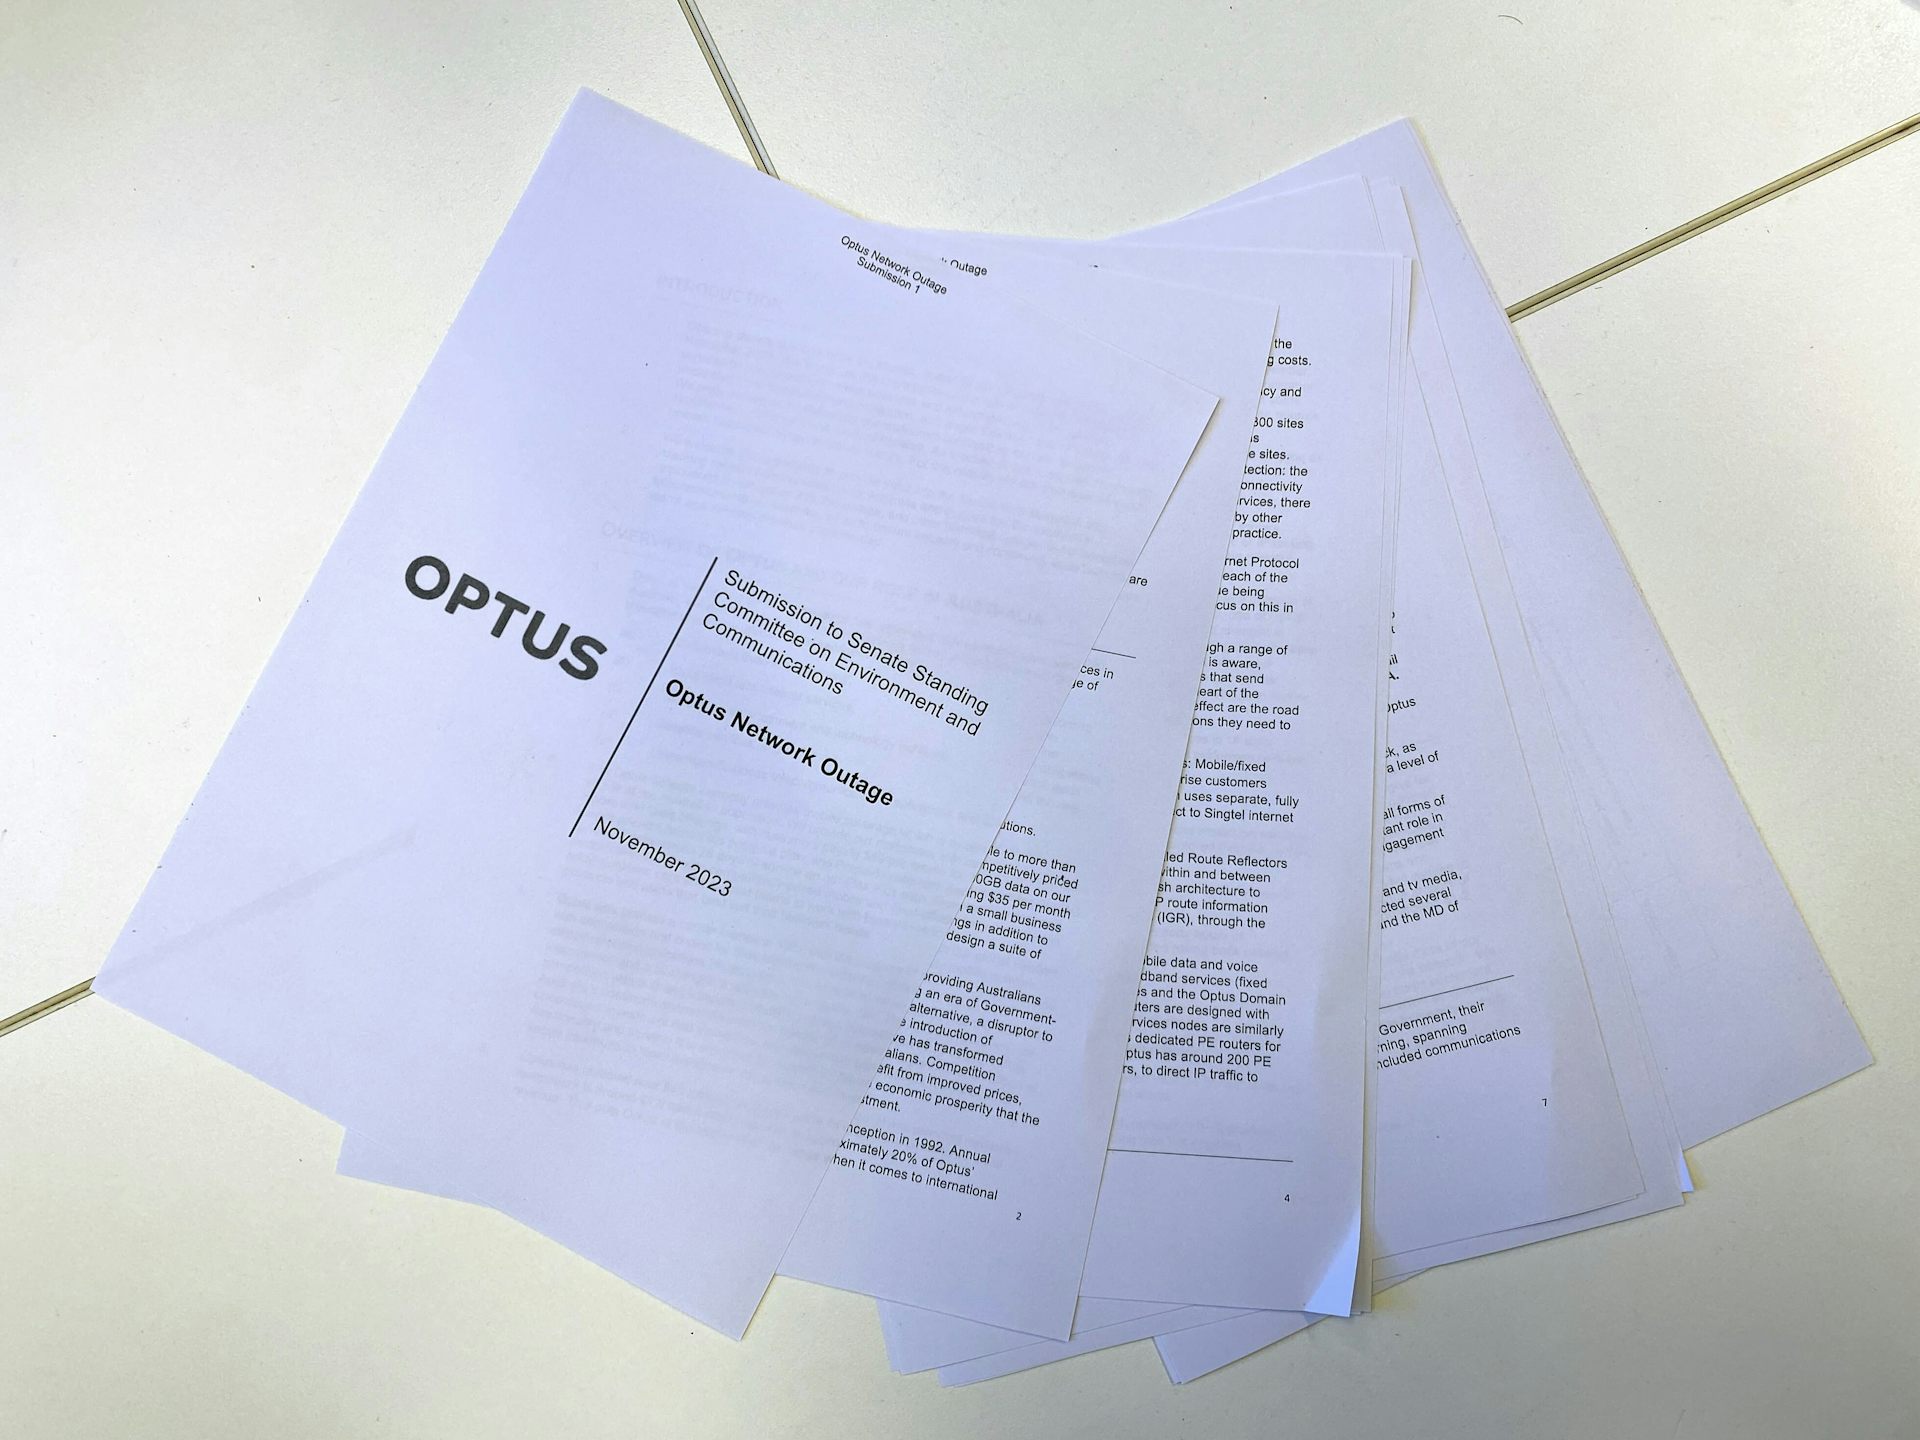 Investigation into Optus outage prompts significant changes. What can be expected now?